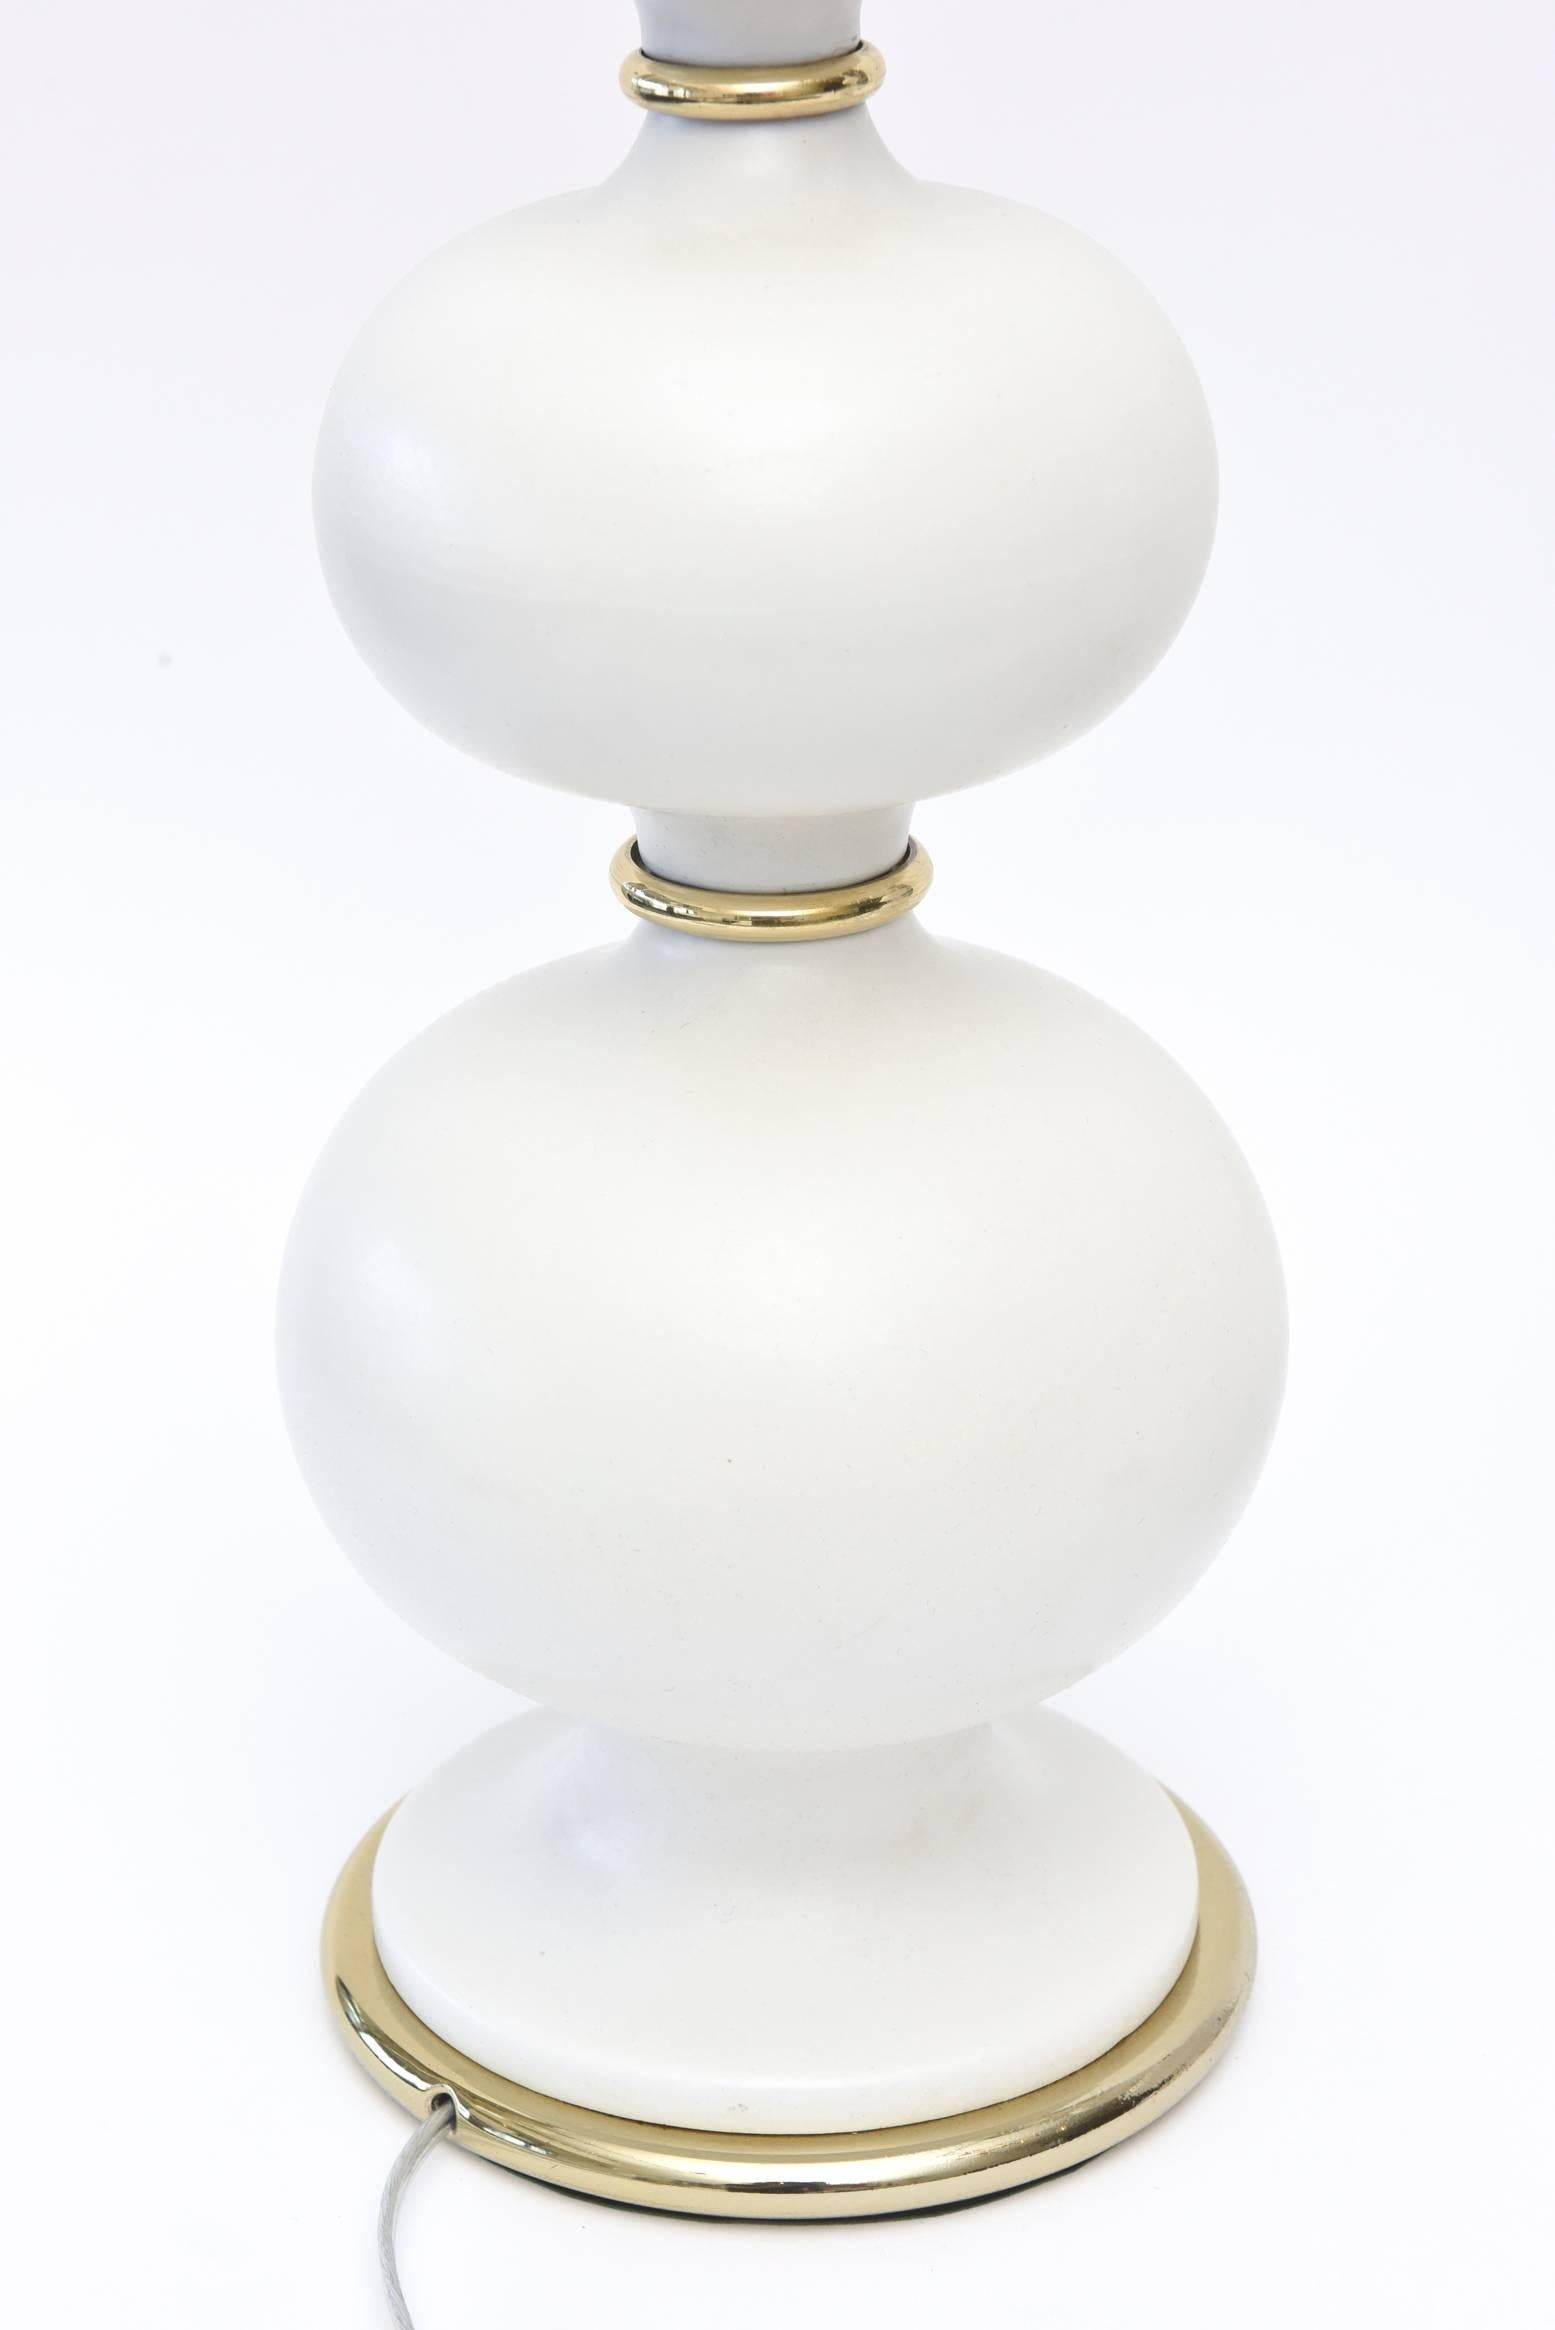  Gerald Thurston White Ceramic and Brass Lamps Mid-Century Modern Pair Of 2